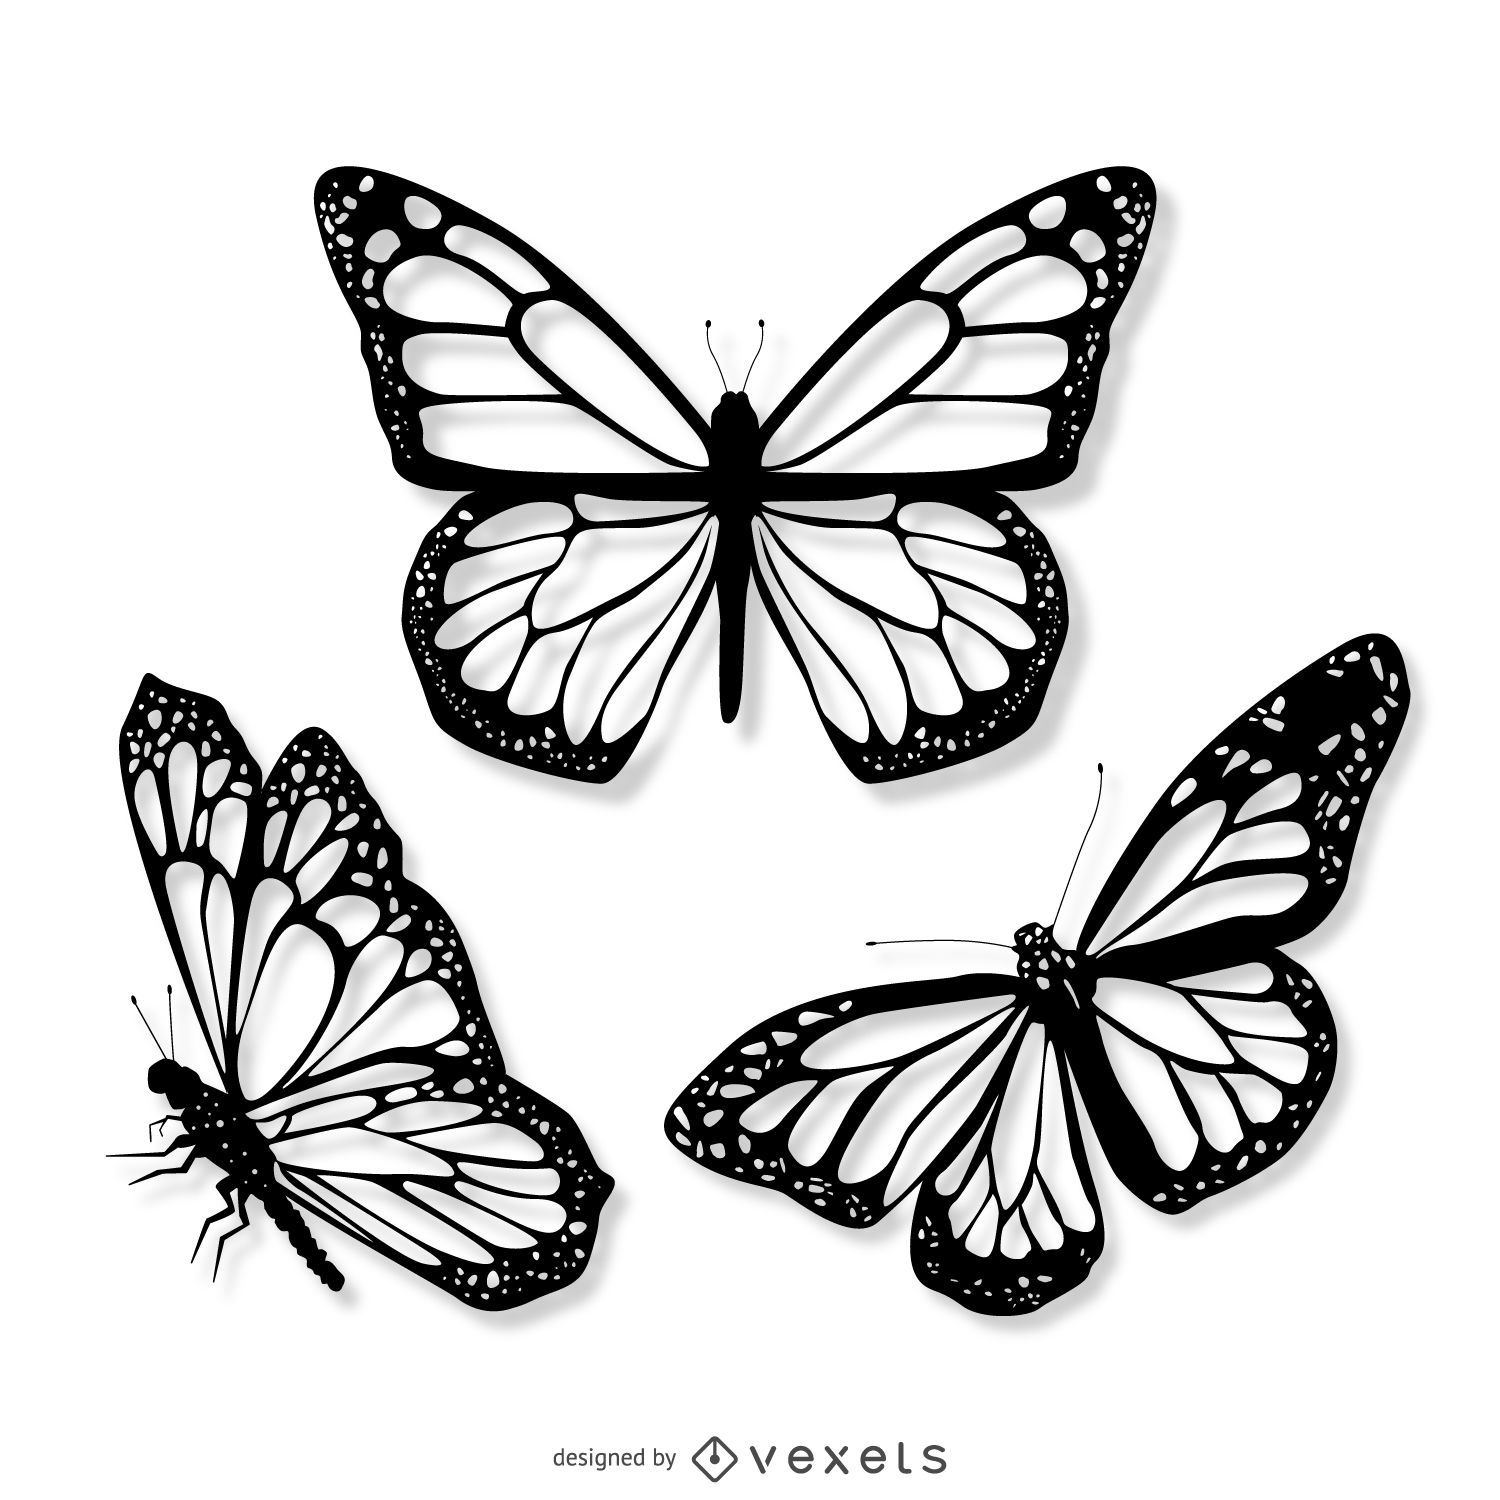 Set with white butterflies Royalty Free Vector Image